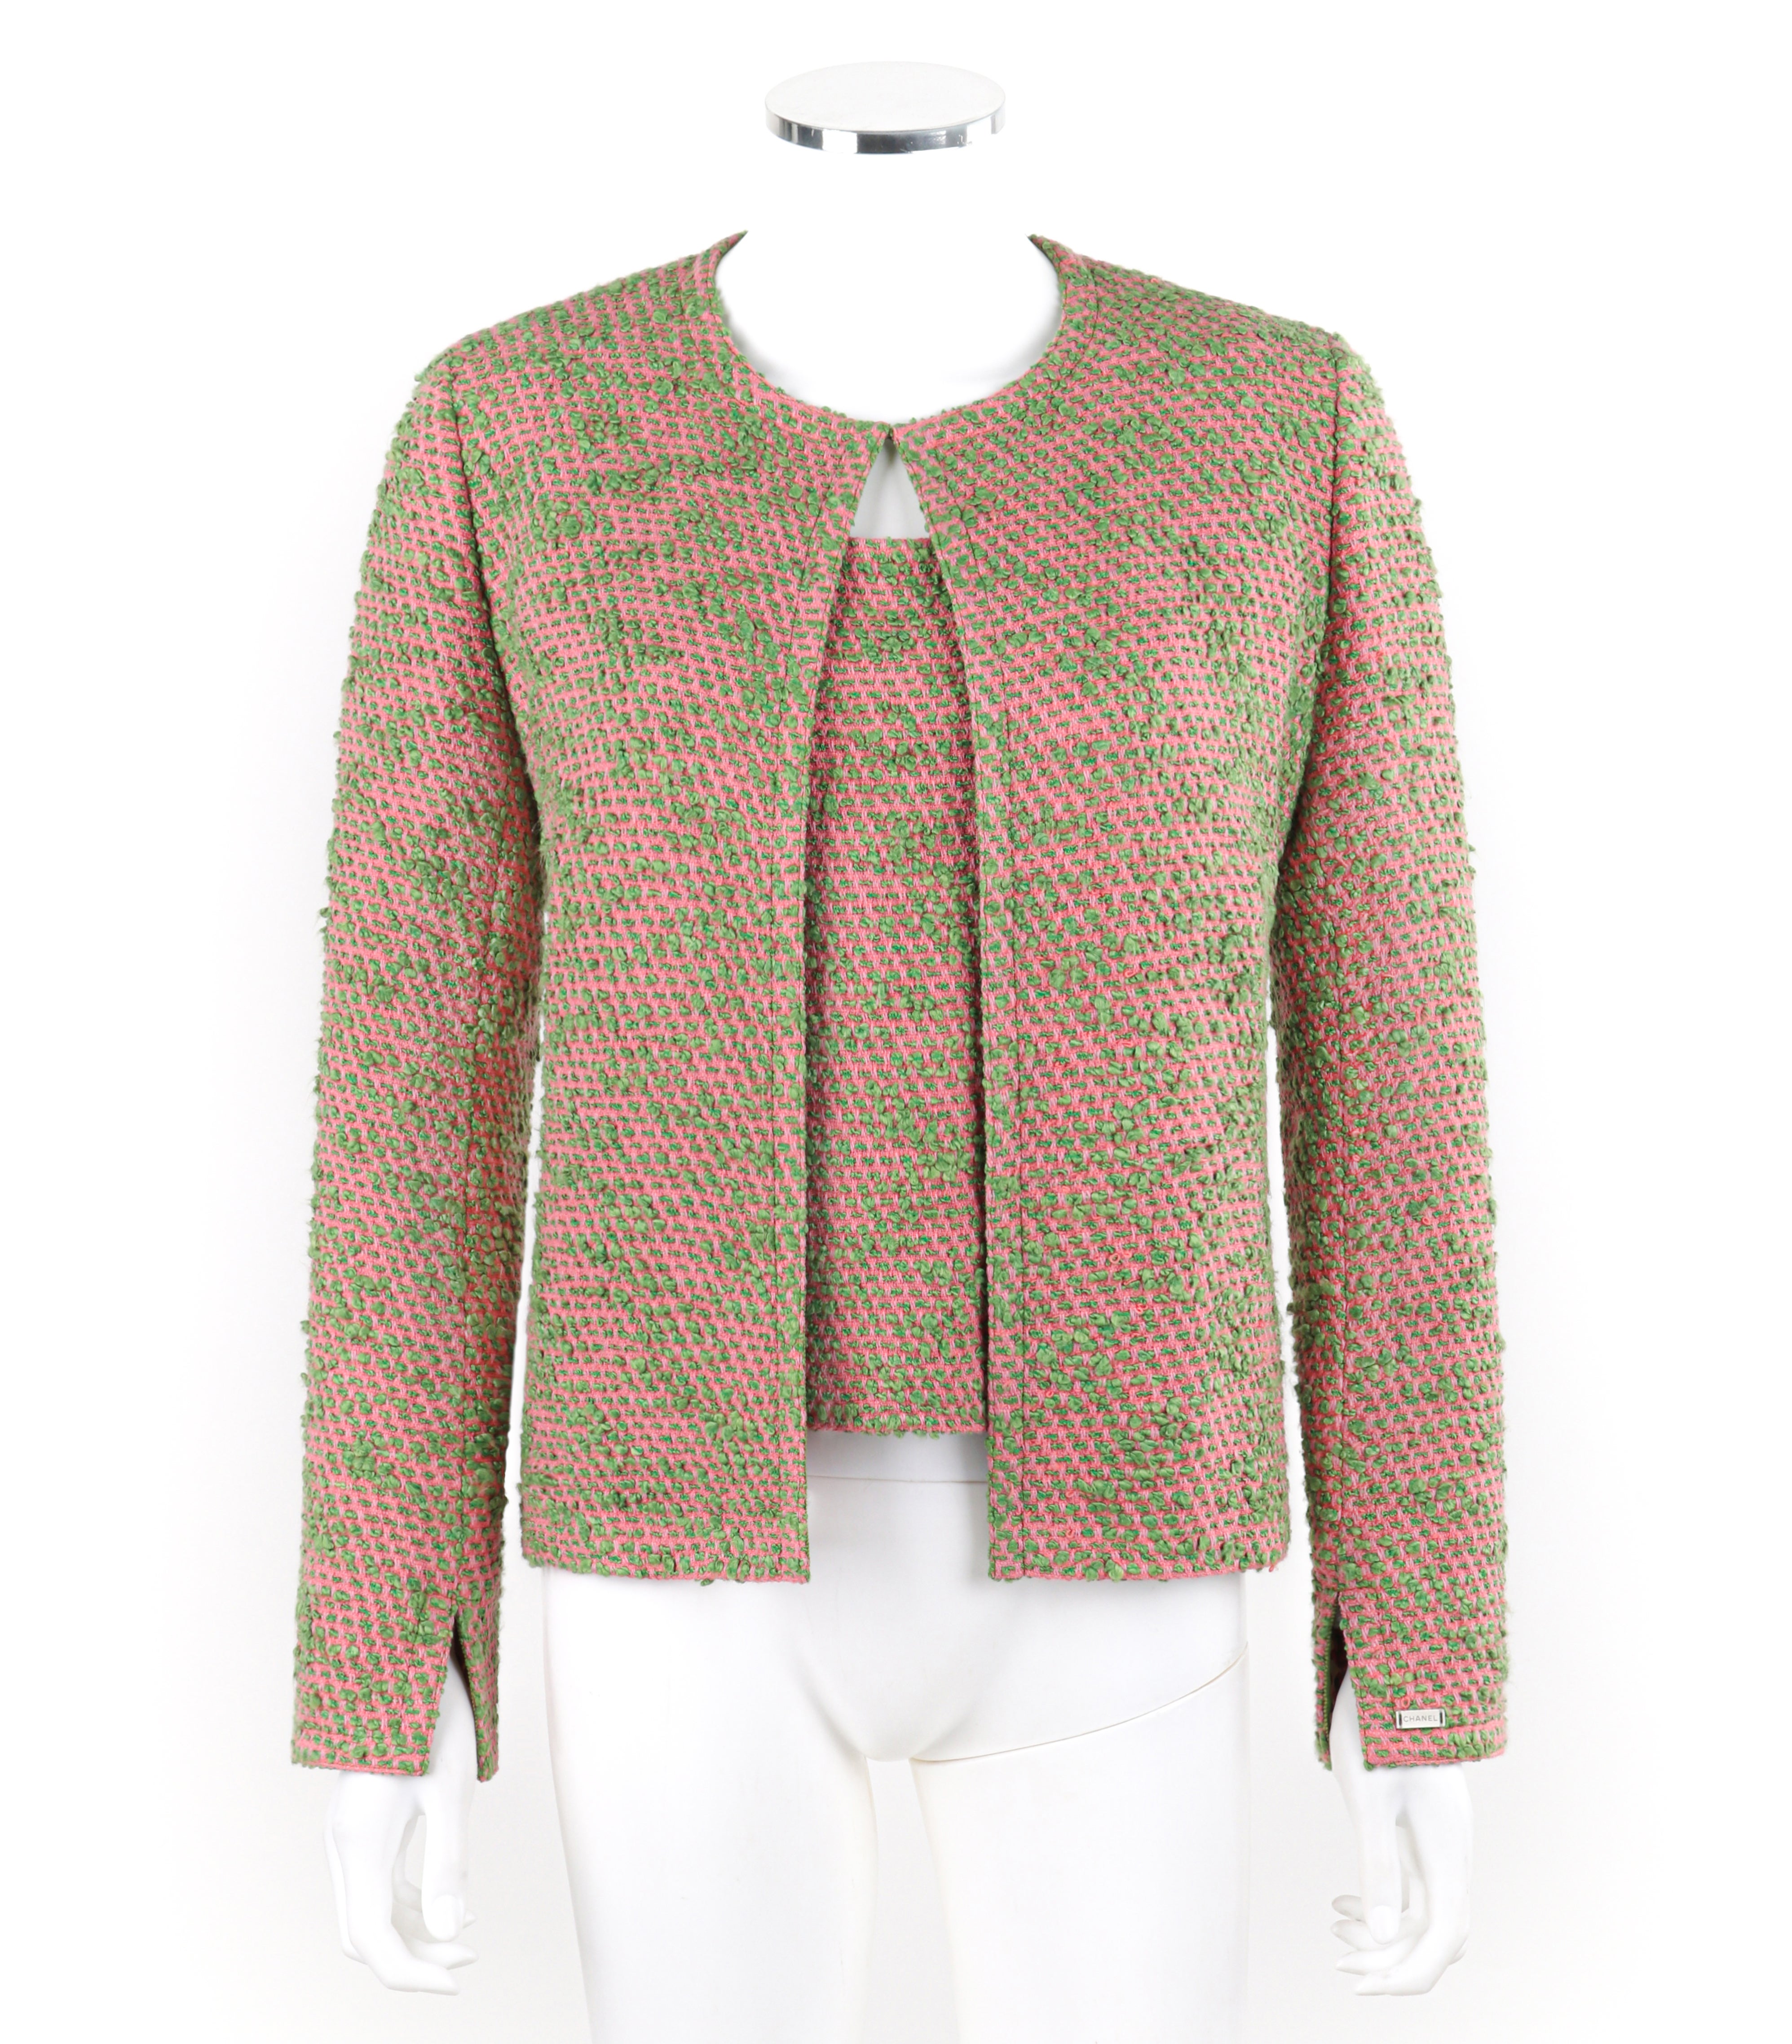 CHANEL c.2000s Pink Green Boucle Knit Silk Jacket & Tank Top Shell 2pc Size 42 For Sale